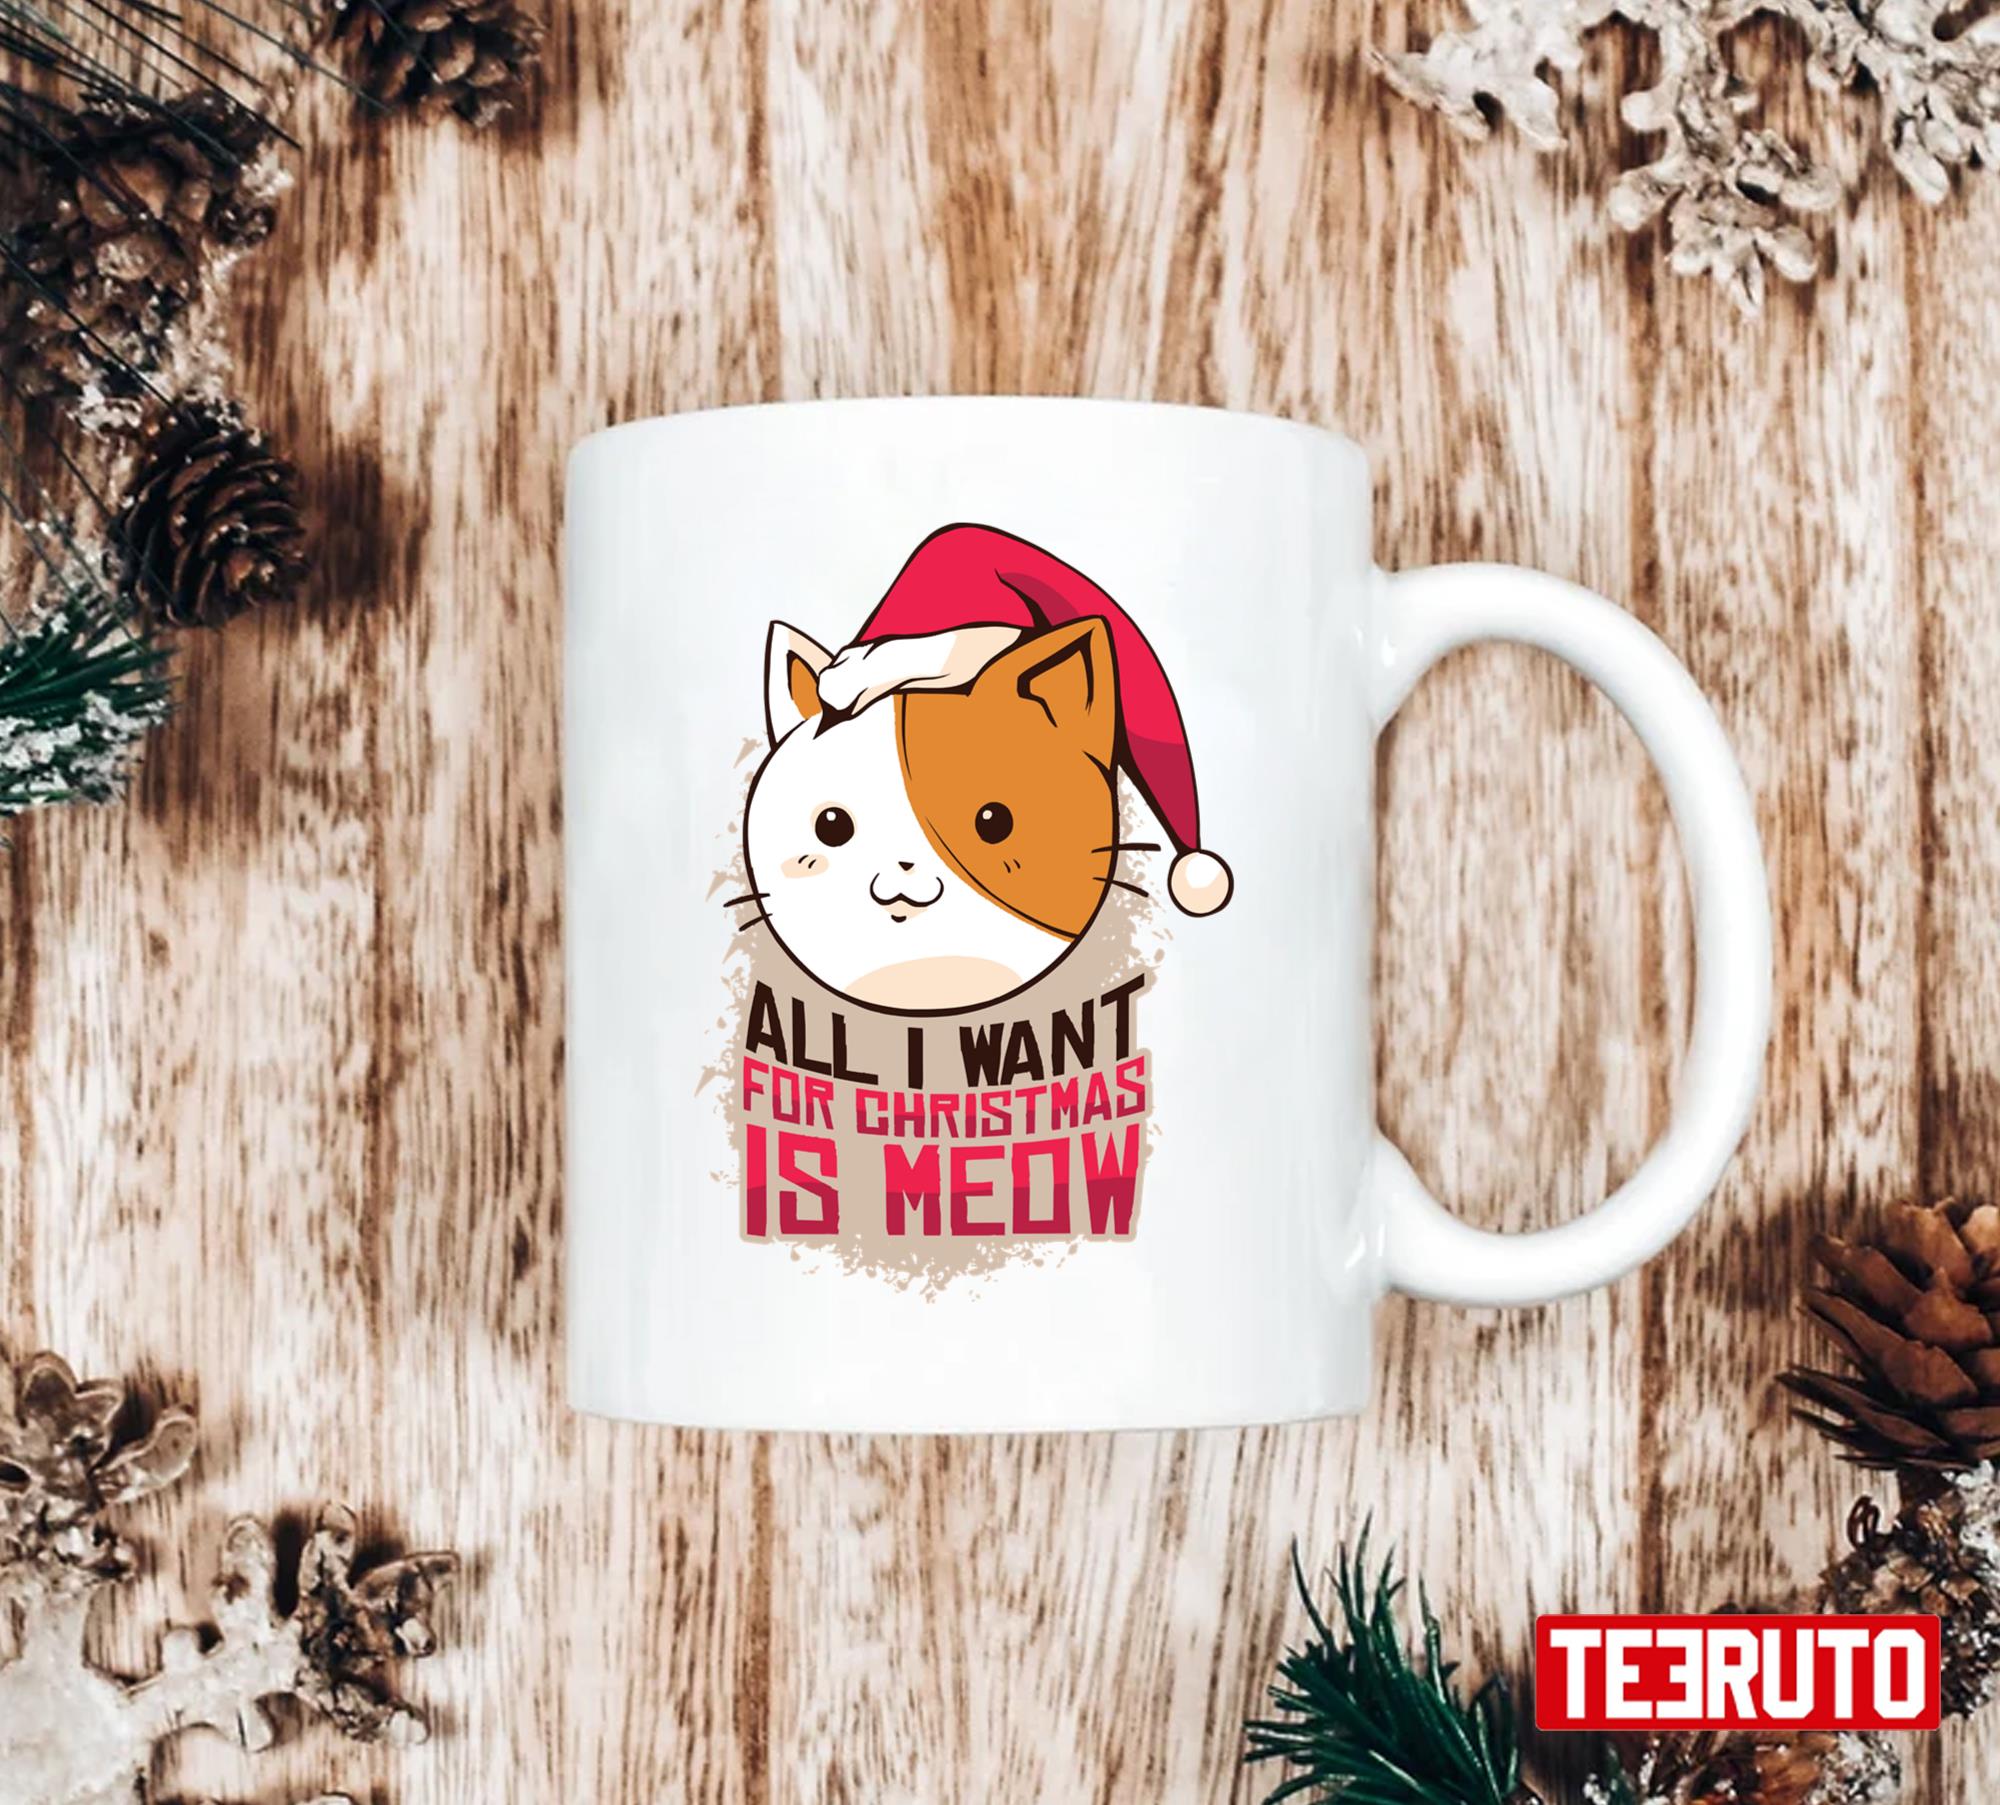 All I Want For Christmas Is Meow 11 oz Ceramic